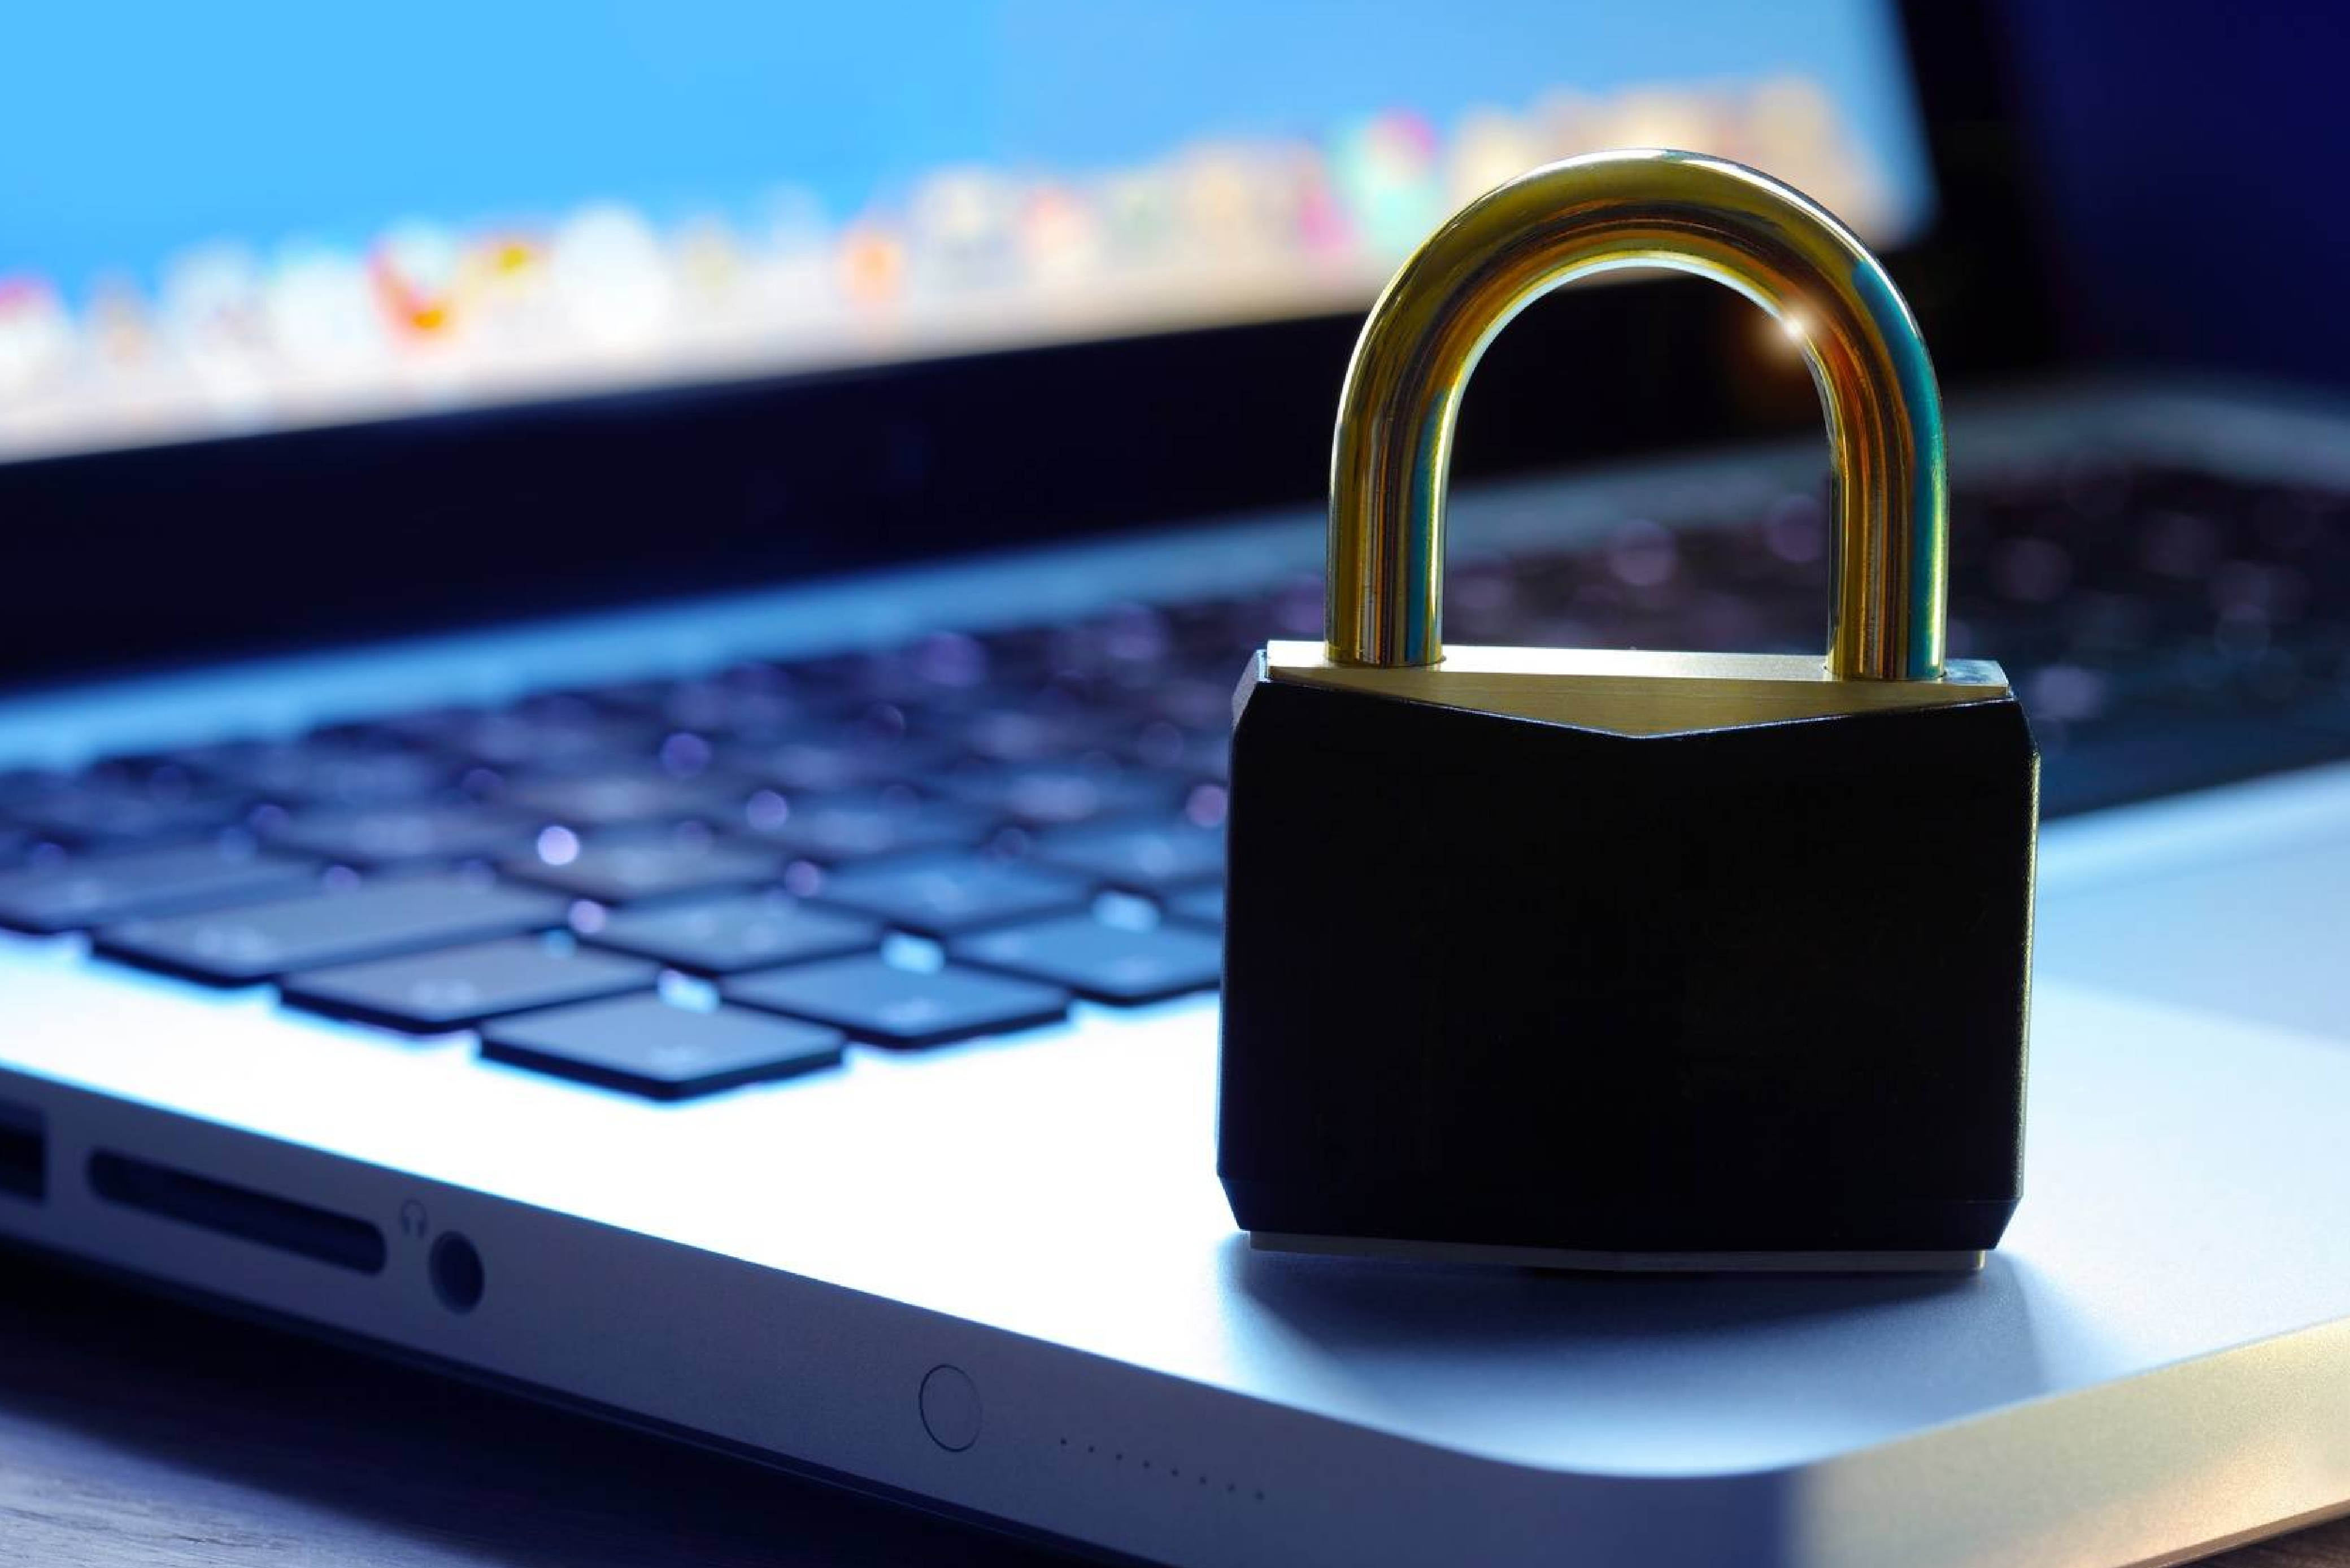 The Guardian's Arsenal: 5 Essential Security Measures to Safeguard Your Digital Products